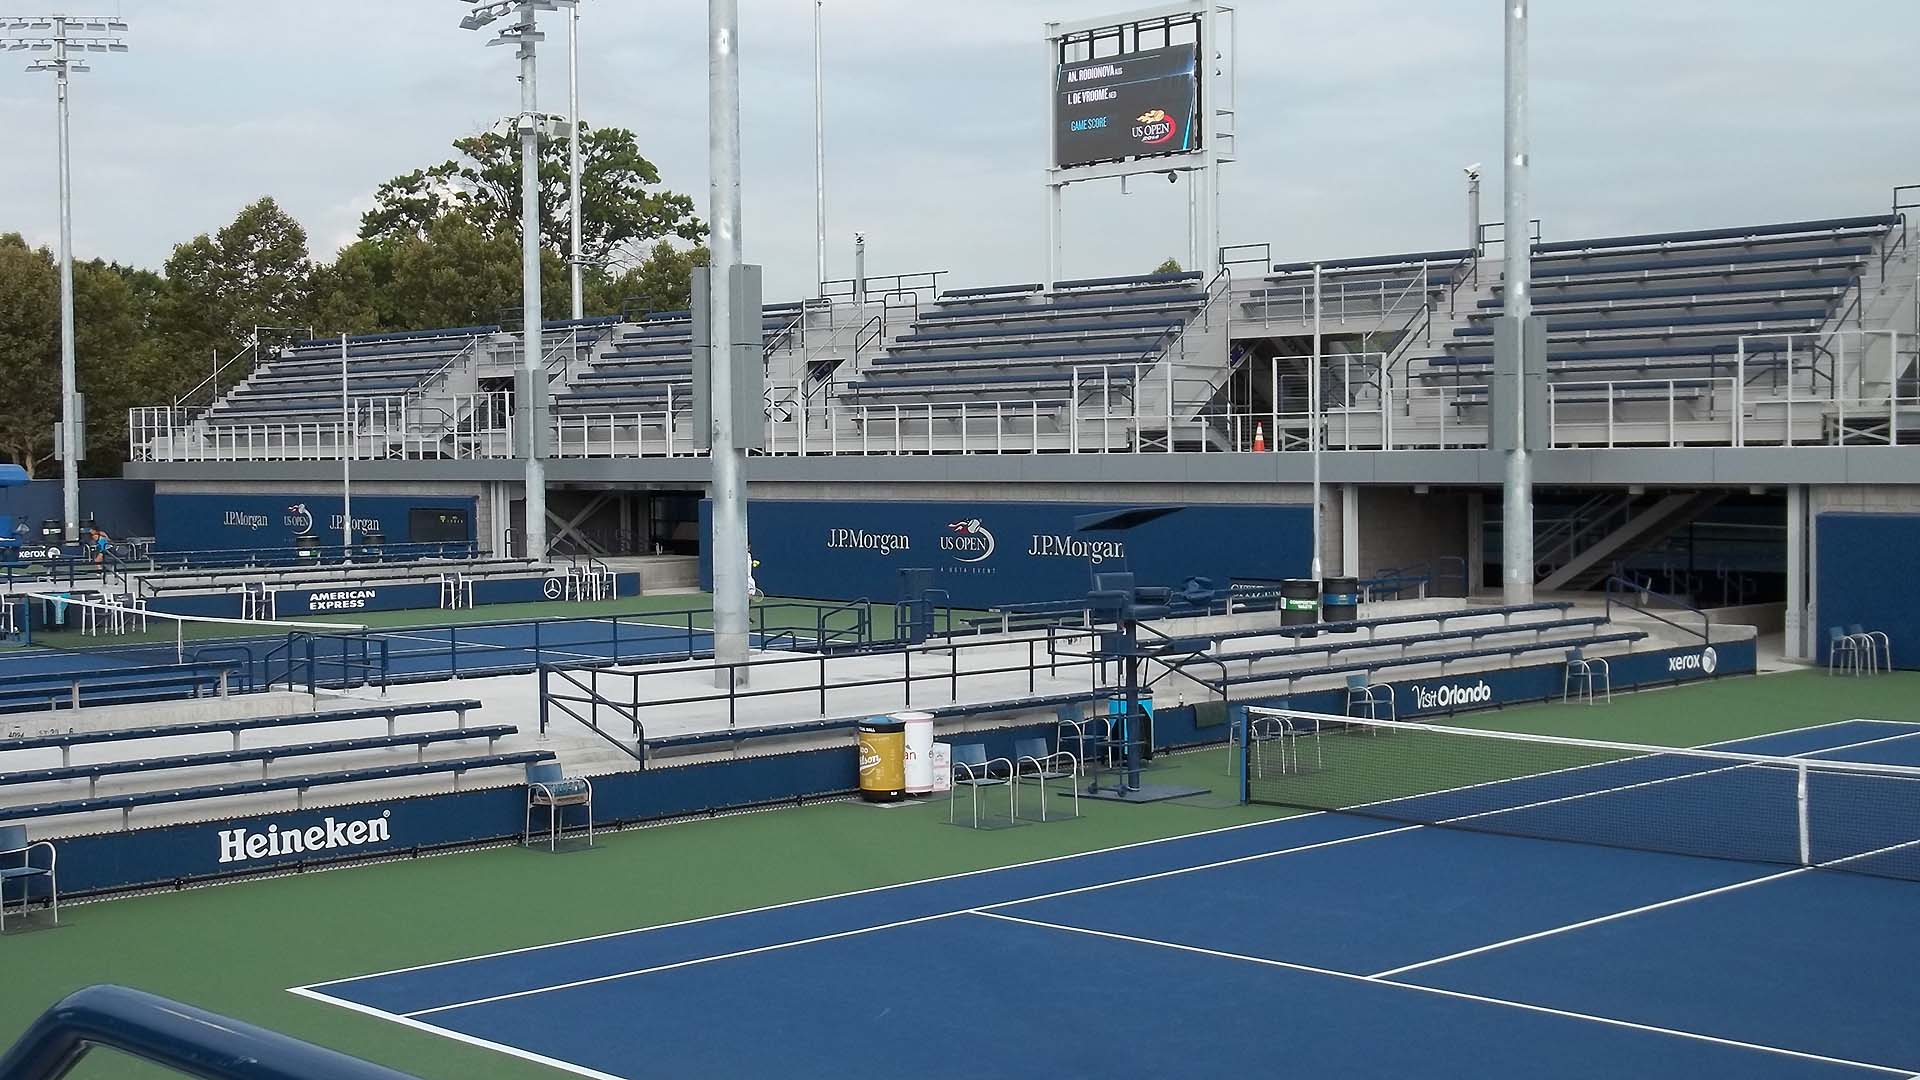 Alternate view of the USTA West Campus, focusing on the I-Beam Grandstand seating.